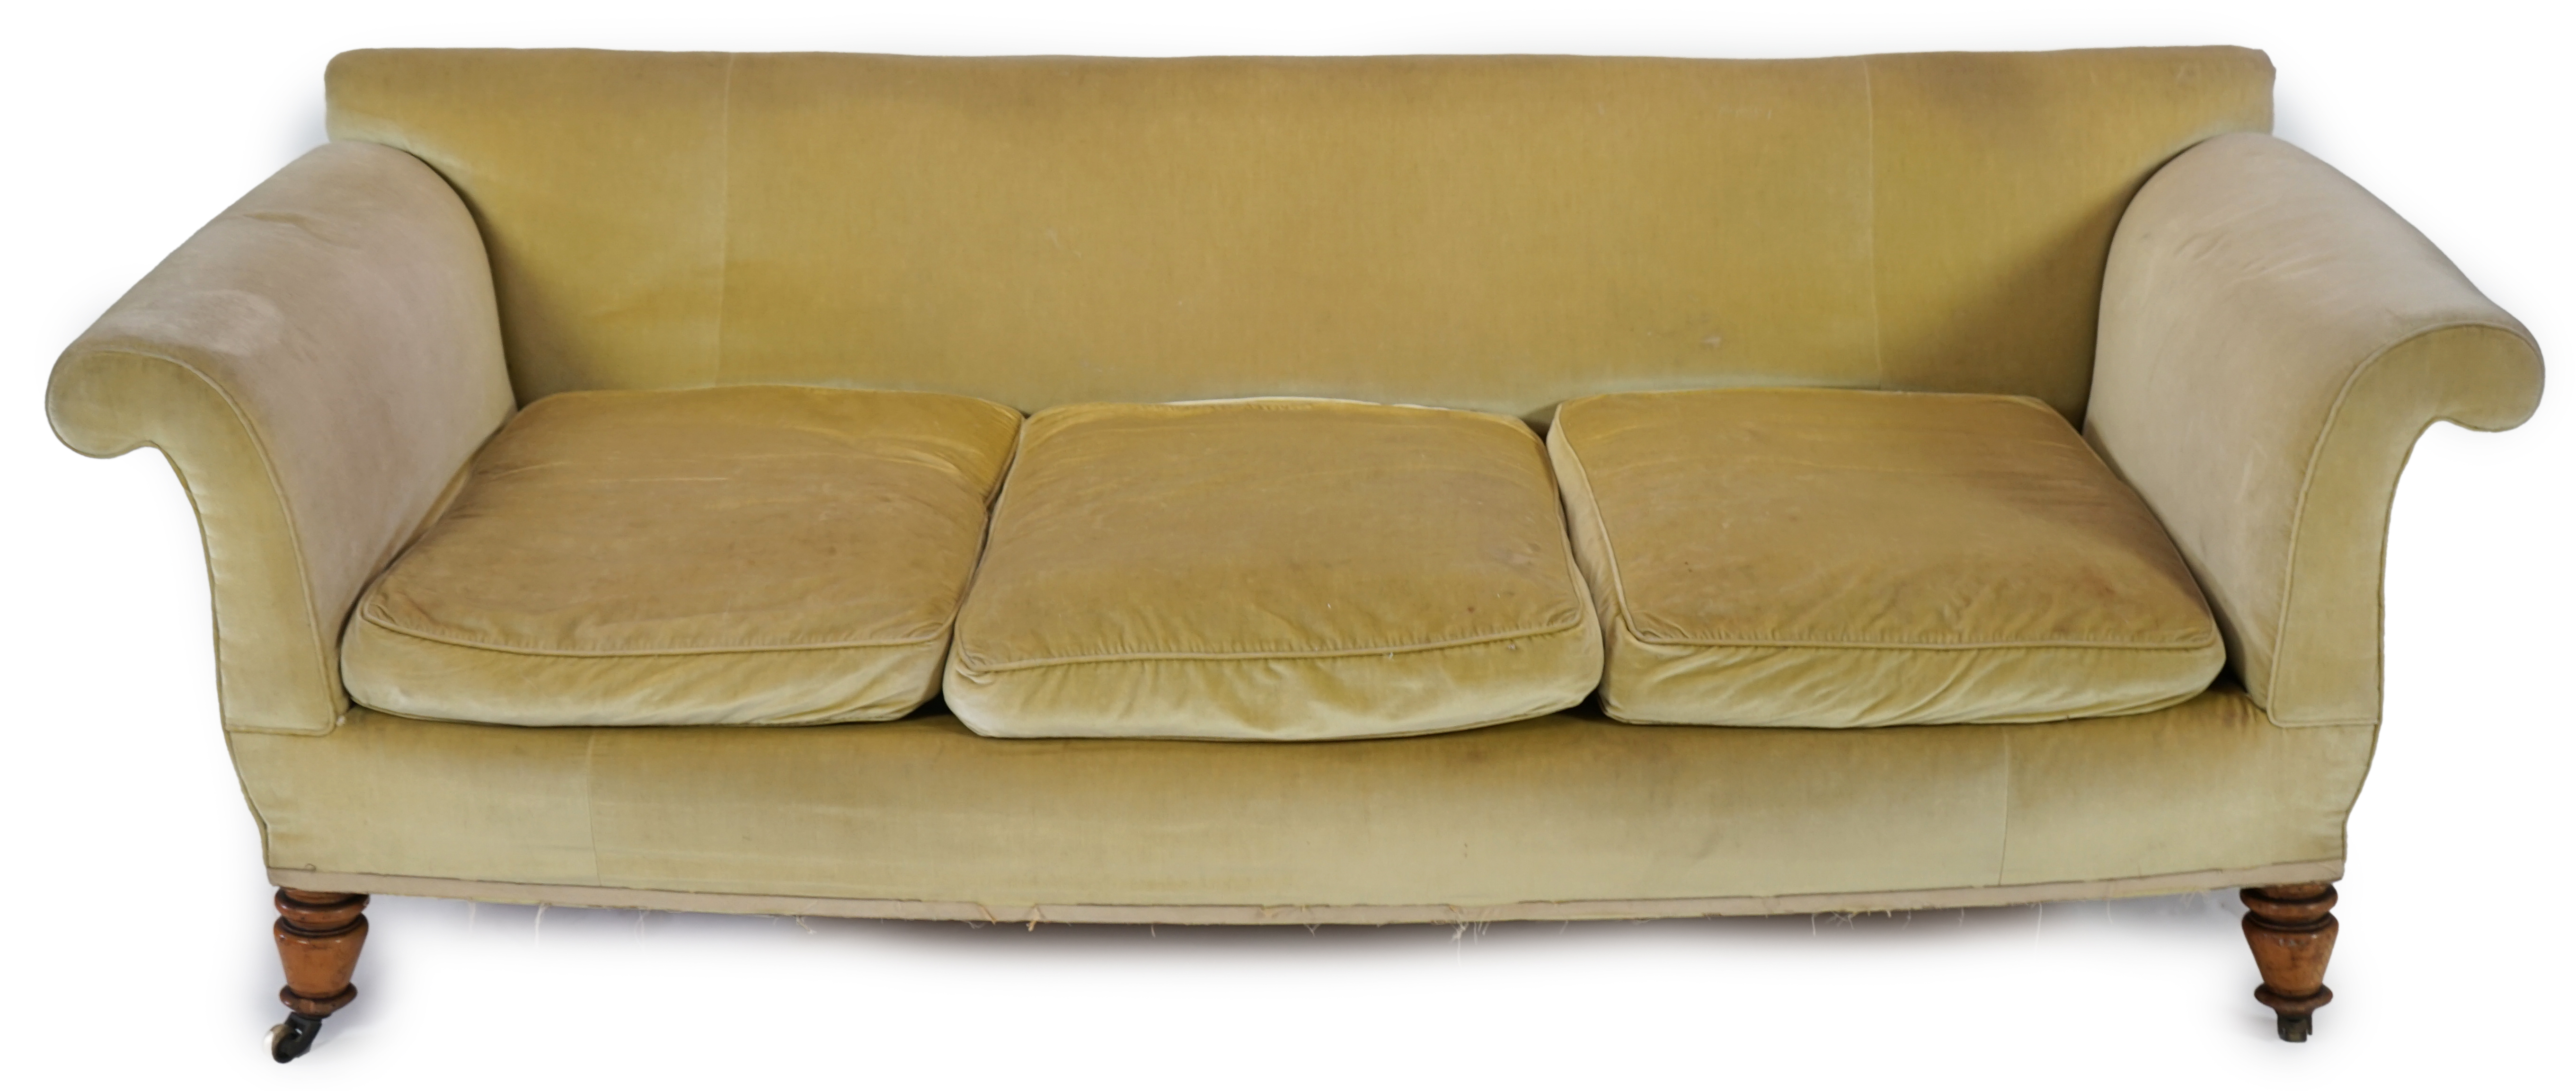 A large Victorian sofa, in the manner of Howard & Sons, probably Cuban mahogany with an English beech frame